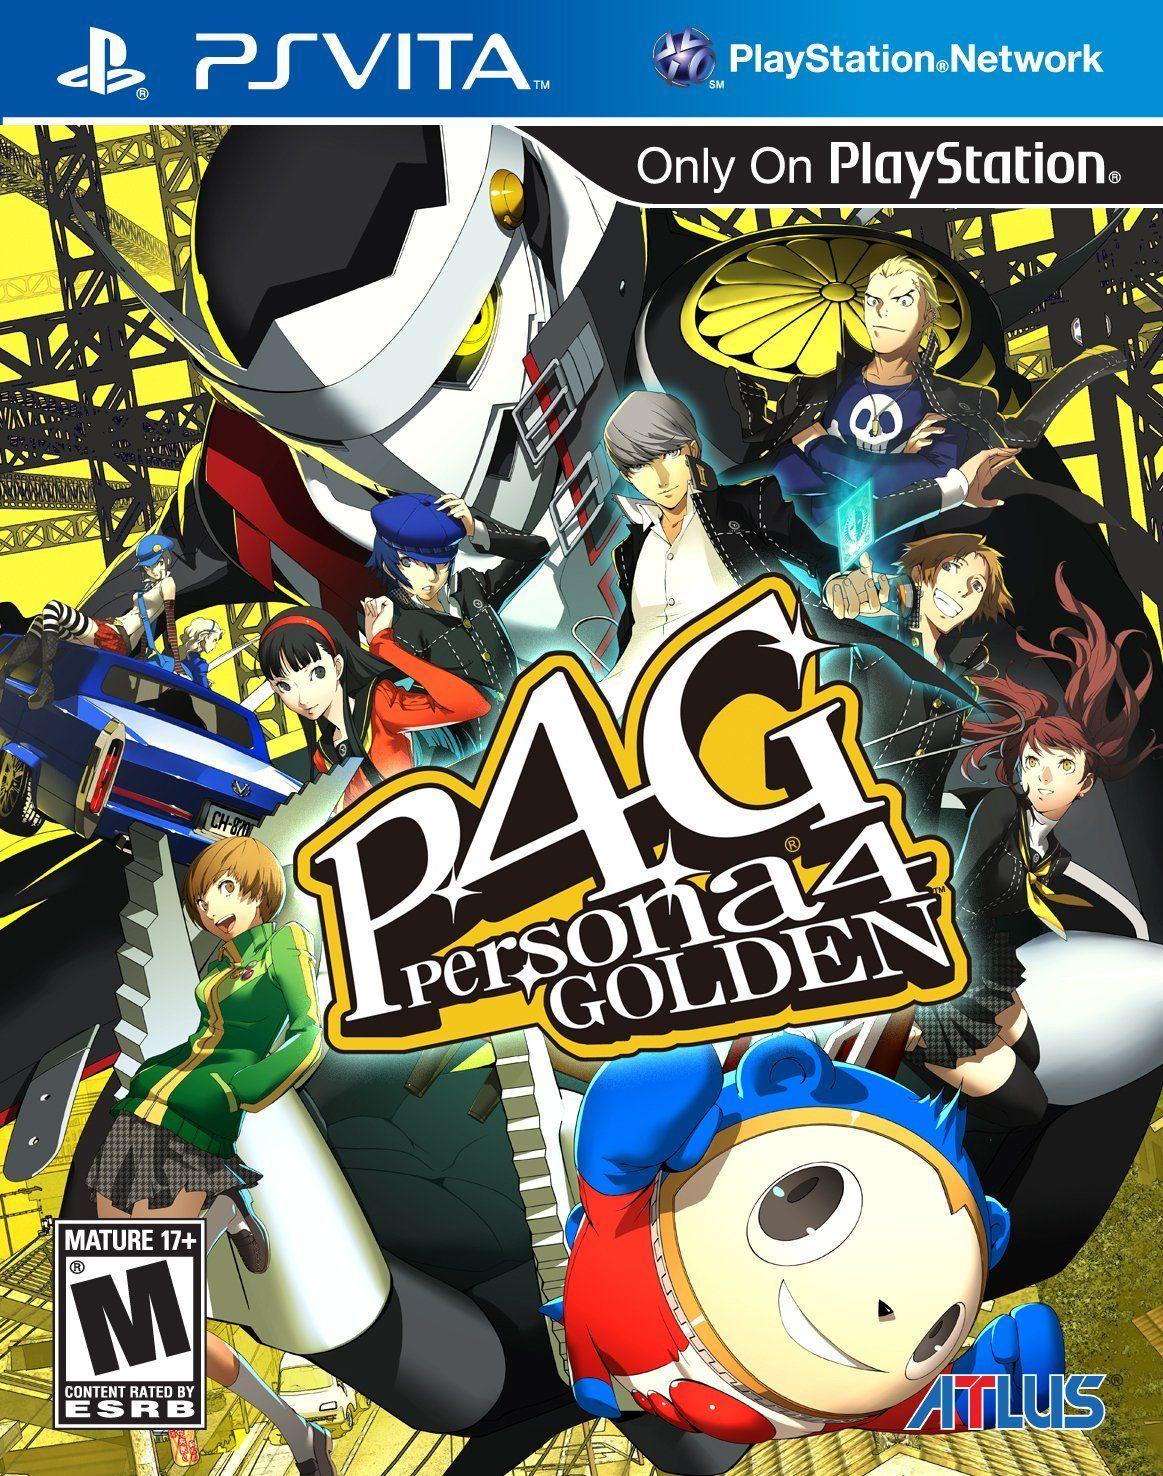 Download PERSONA 4: GOLDEN Ps Vita FUll Following in the footsteps